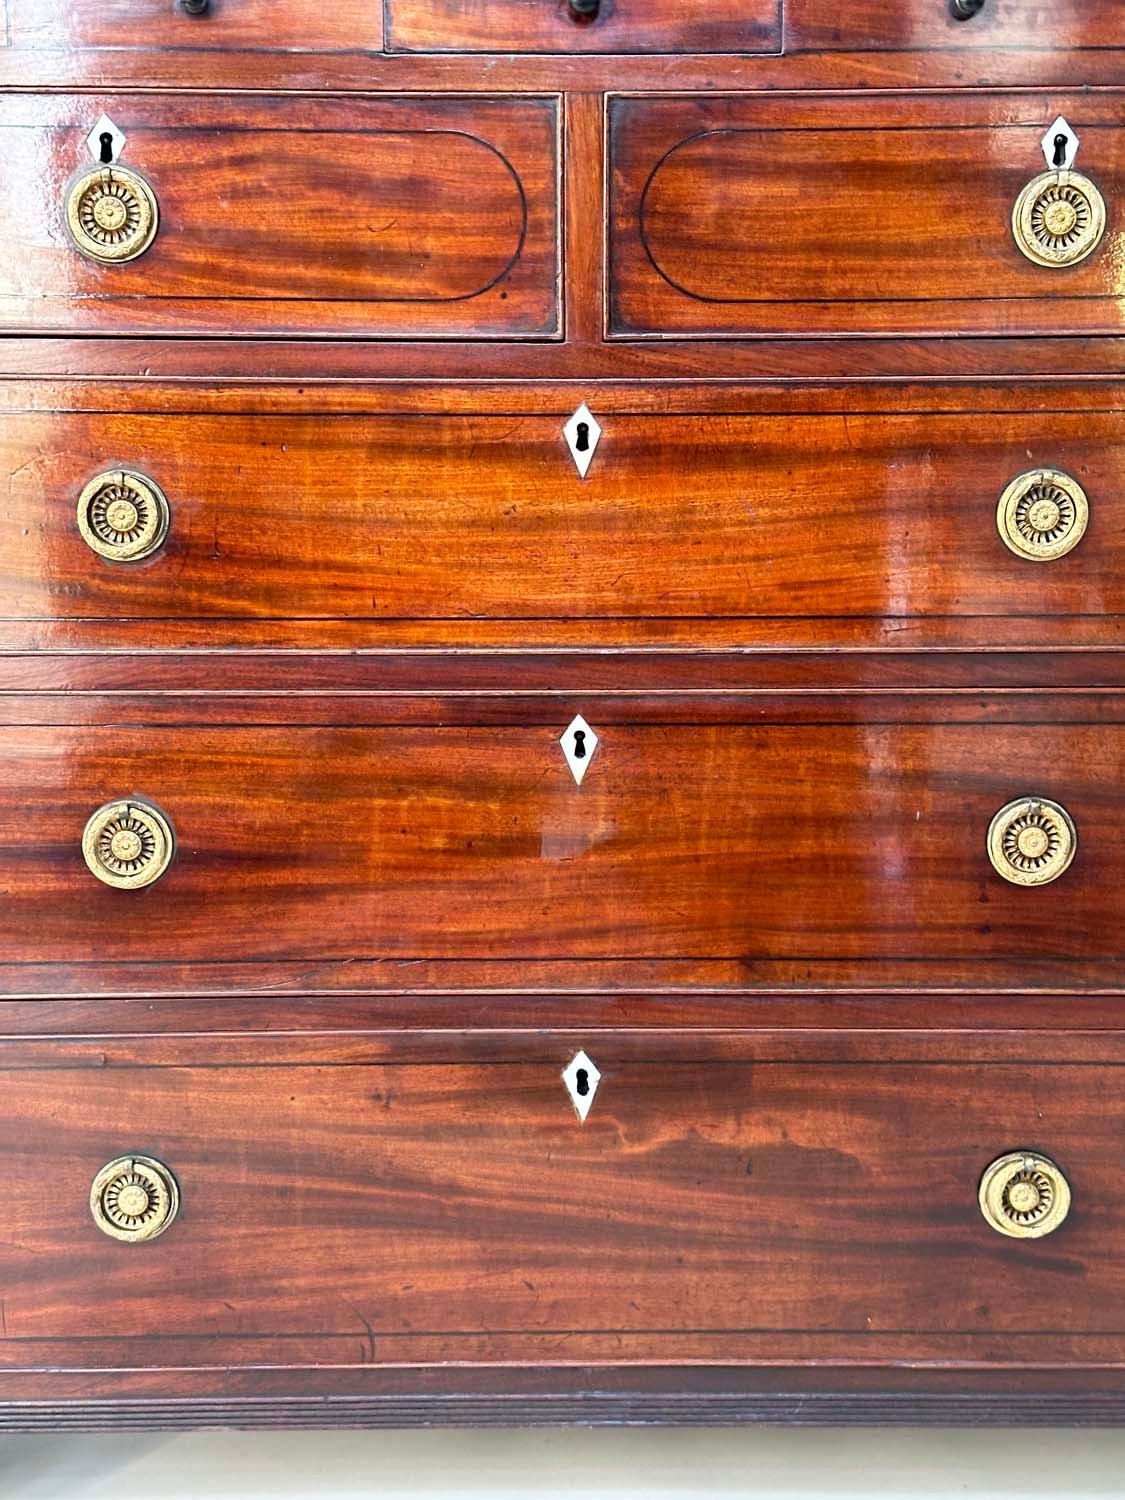 SCOTTISH HALL CHEST, early 19th century figured mahogany of adapted shallow proportions with real - Image 7 of 8